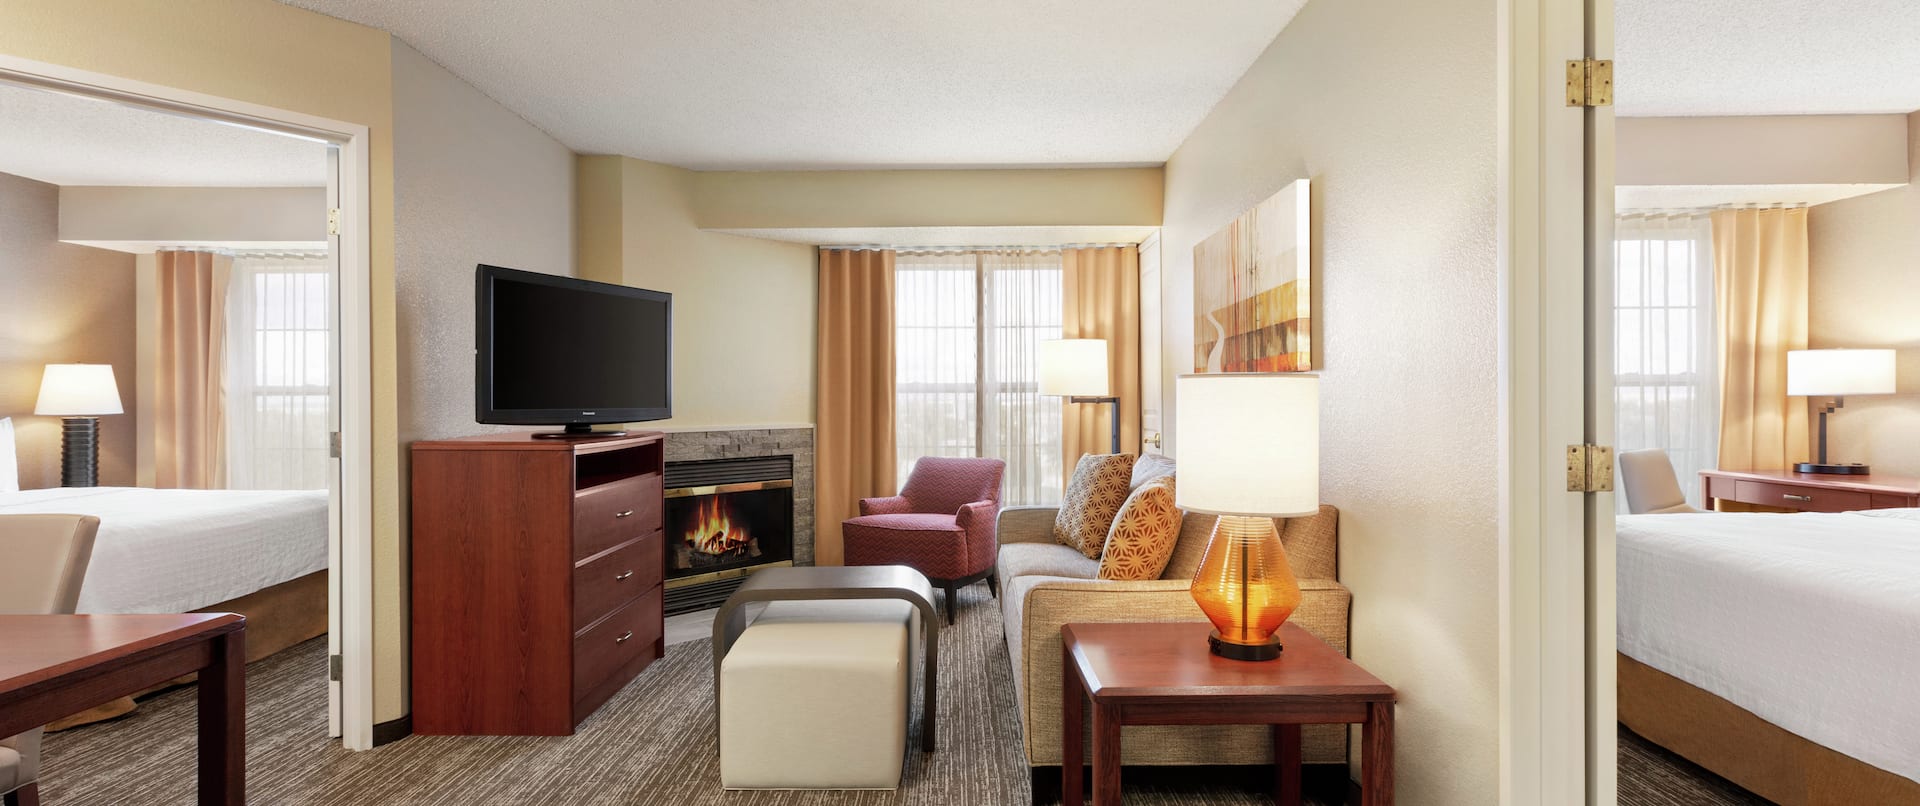 Lounge Area, Fireplace, and TV in Two Queen Bedroom Suite